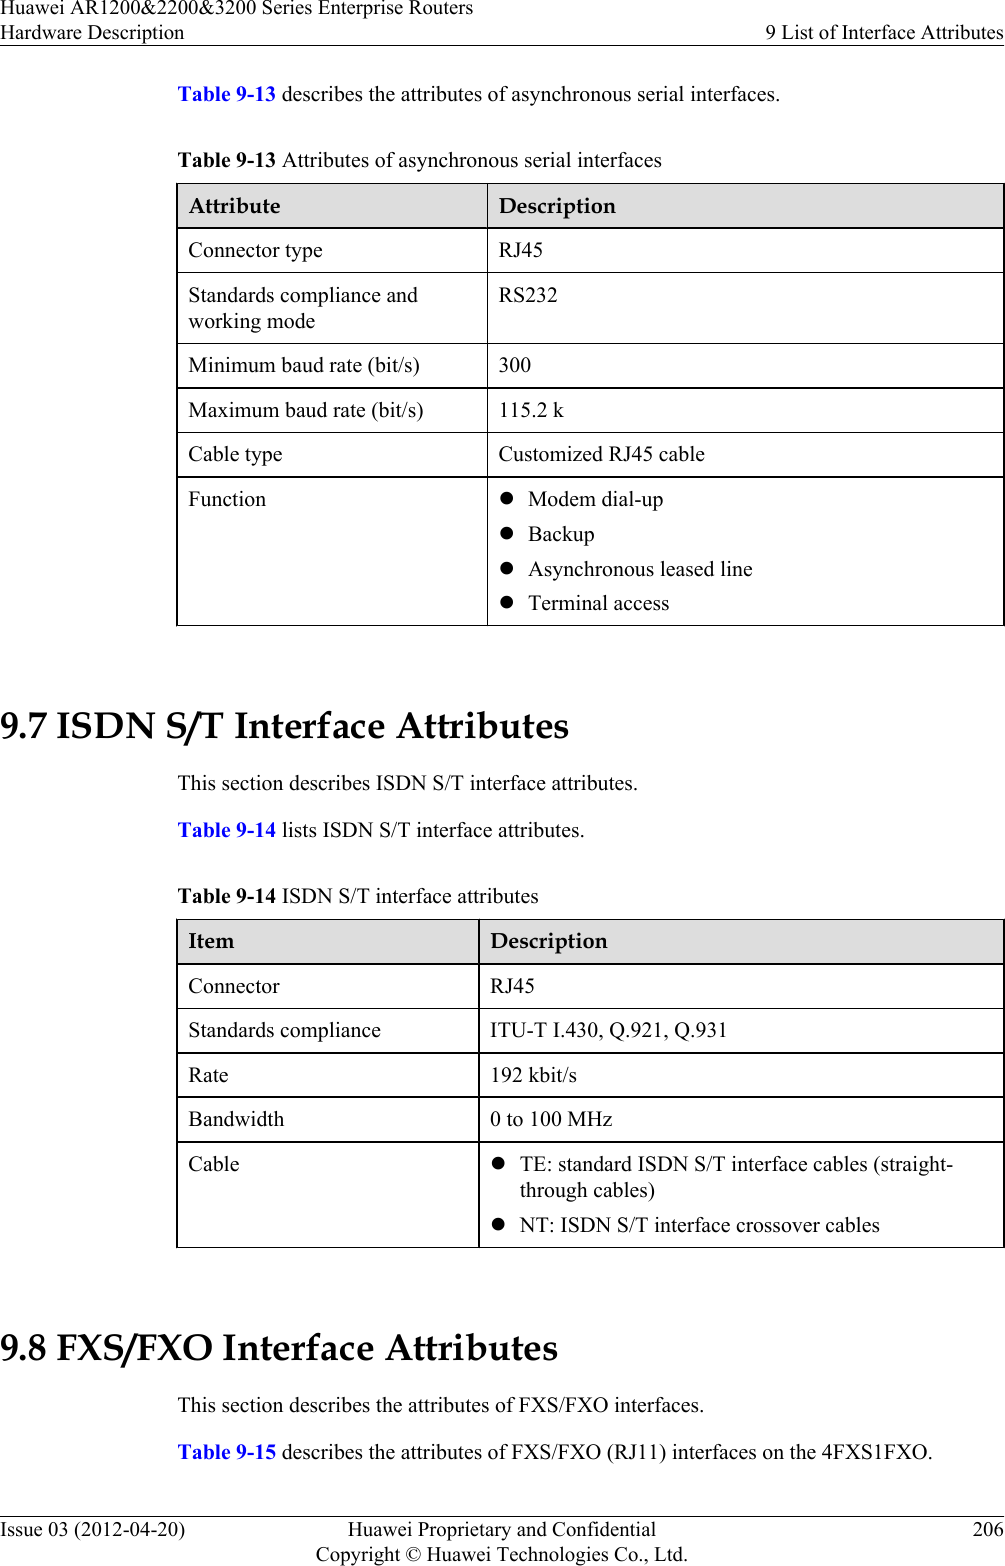 Table 9-13 describes the attributes of asynchronous serial interfaces.Table 9-13 Attributes of asynchronous serial interfacesAttribute DescriptionConnector type RJ45Standards compliance andworking modeRS232Minimum baud rate (bit/s) 300Maximum baud rate (bit/s) 115.2 kCable type Customized RJ45 cableFunction lModem dial-uplBackuplAsynchronous leased linelTerminal access 9.7 ISDN S/T Interface AttributesThis section describes ISDN S/T interface attributes.Table 9-14 lists ISDN S/T interface attributes.Table 9-14 ISDN S/T interface attributesItem DescriptionConnector RJ45Standards compliance ITU-T I.430, Q.921, Q.931Rate 192 kbit/sBandwidth 0 to 100 MHzCable lTE: standard ISDN S/T interface cables (straight-through cables)lNT: ISDN S/T interface crossover cables 9.8 FXS/FXO Interface AttributesThis section describes the attributes of FXS/FXO interfaces.Table 9-15 describes the attributes of FXS/FXO (RJ11) interfaces on the 4FXS1FXO.Huawei AR1200&amp;2200&amp;3200 Series Enterprise RoutersHardware Description 9 List of Interface AttributesIssue 03 (2012-04-20) Huawei Proprietary and ConfidentialCopyright © Huawei Technologies Co., Ltd.206